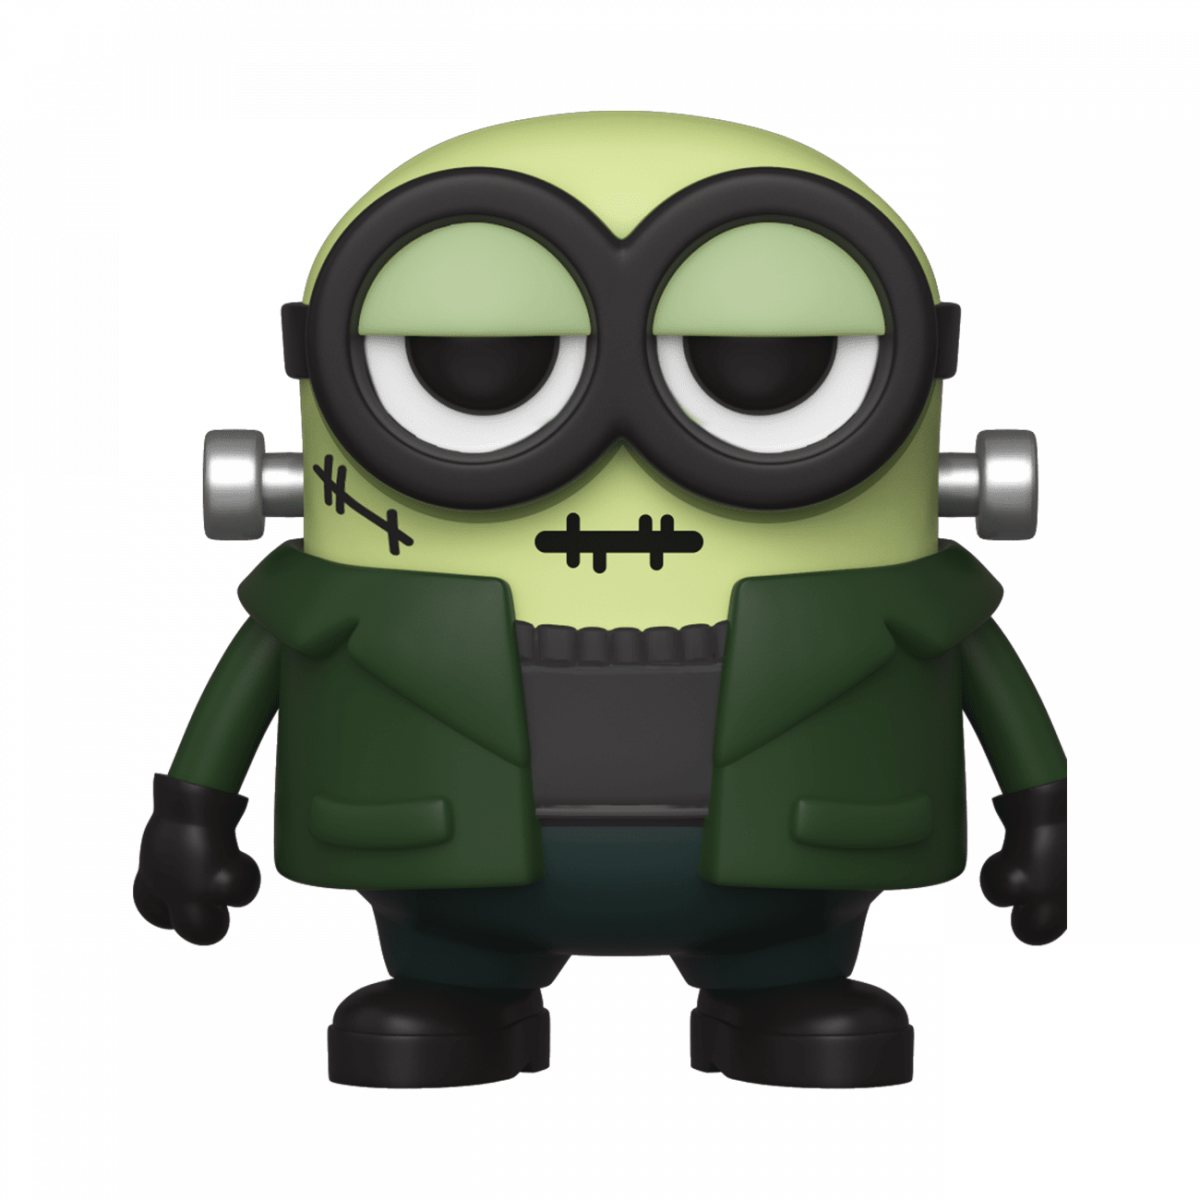 Celebrate Funkoween with Universal Minion Monsters Pop vinyls!